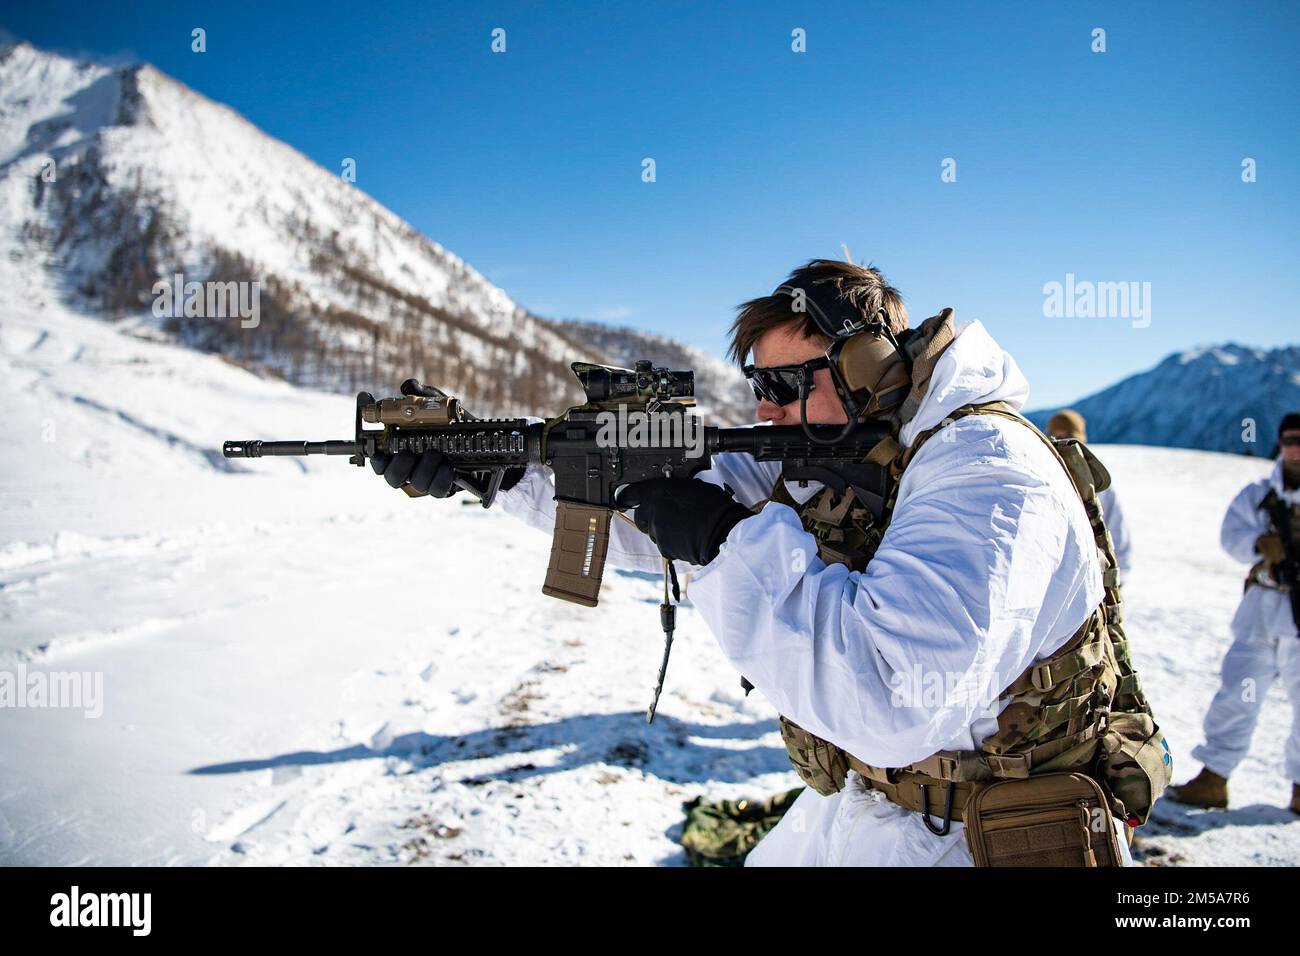 A U.S. Army paratrooper assigned to 2nd Battalion, 503rd Parachute Infantry Regiment engages targets while performing acquisition drills during an integrated marksmanship range alongside Italian soldiers from the 3rd Alpini Regiment. This training is part of Exercise Steel Blizzard at Pian dell’Alpe in Usseaux, Italy on Feb. 15, 2022.     Exercise Steel Blizzard is an Italian Army-hosted multinational mountain and arctic warfare training exercise. Three reconnaissance platoons from the 173rd Airborne Brigade take part in a three-phase training regimen with the 3rd Alpini Regiment to expand for Stock Photo